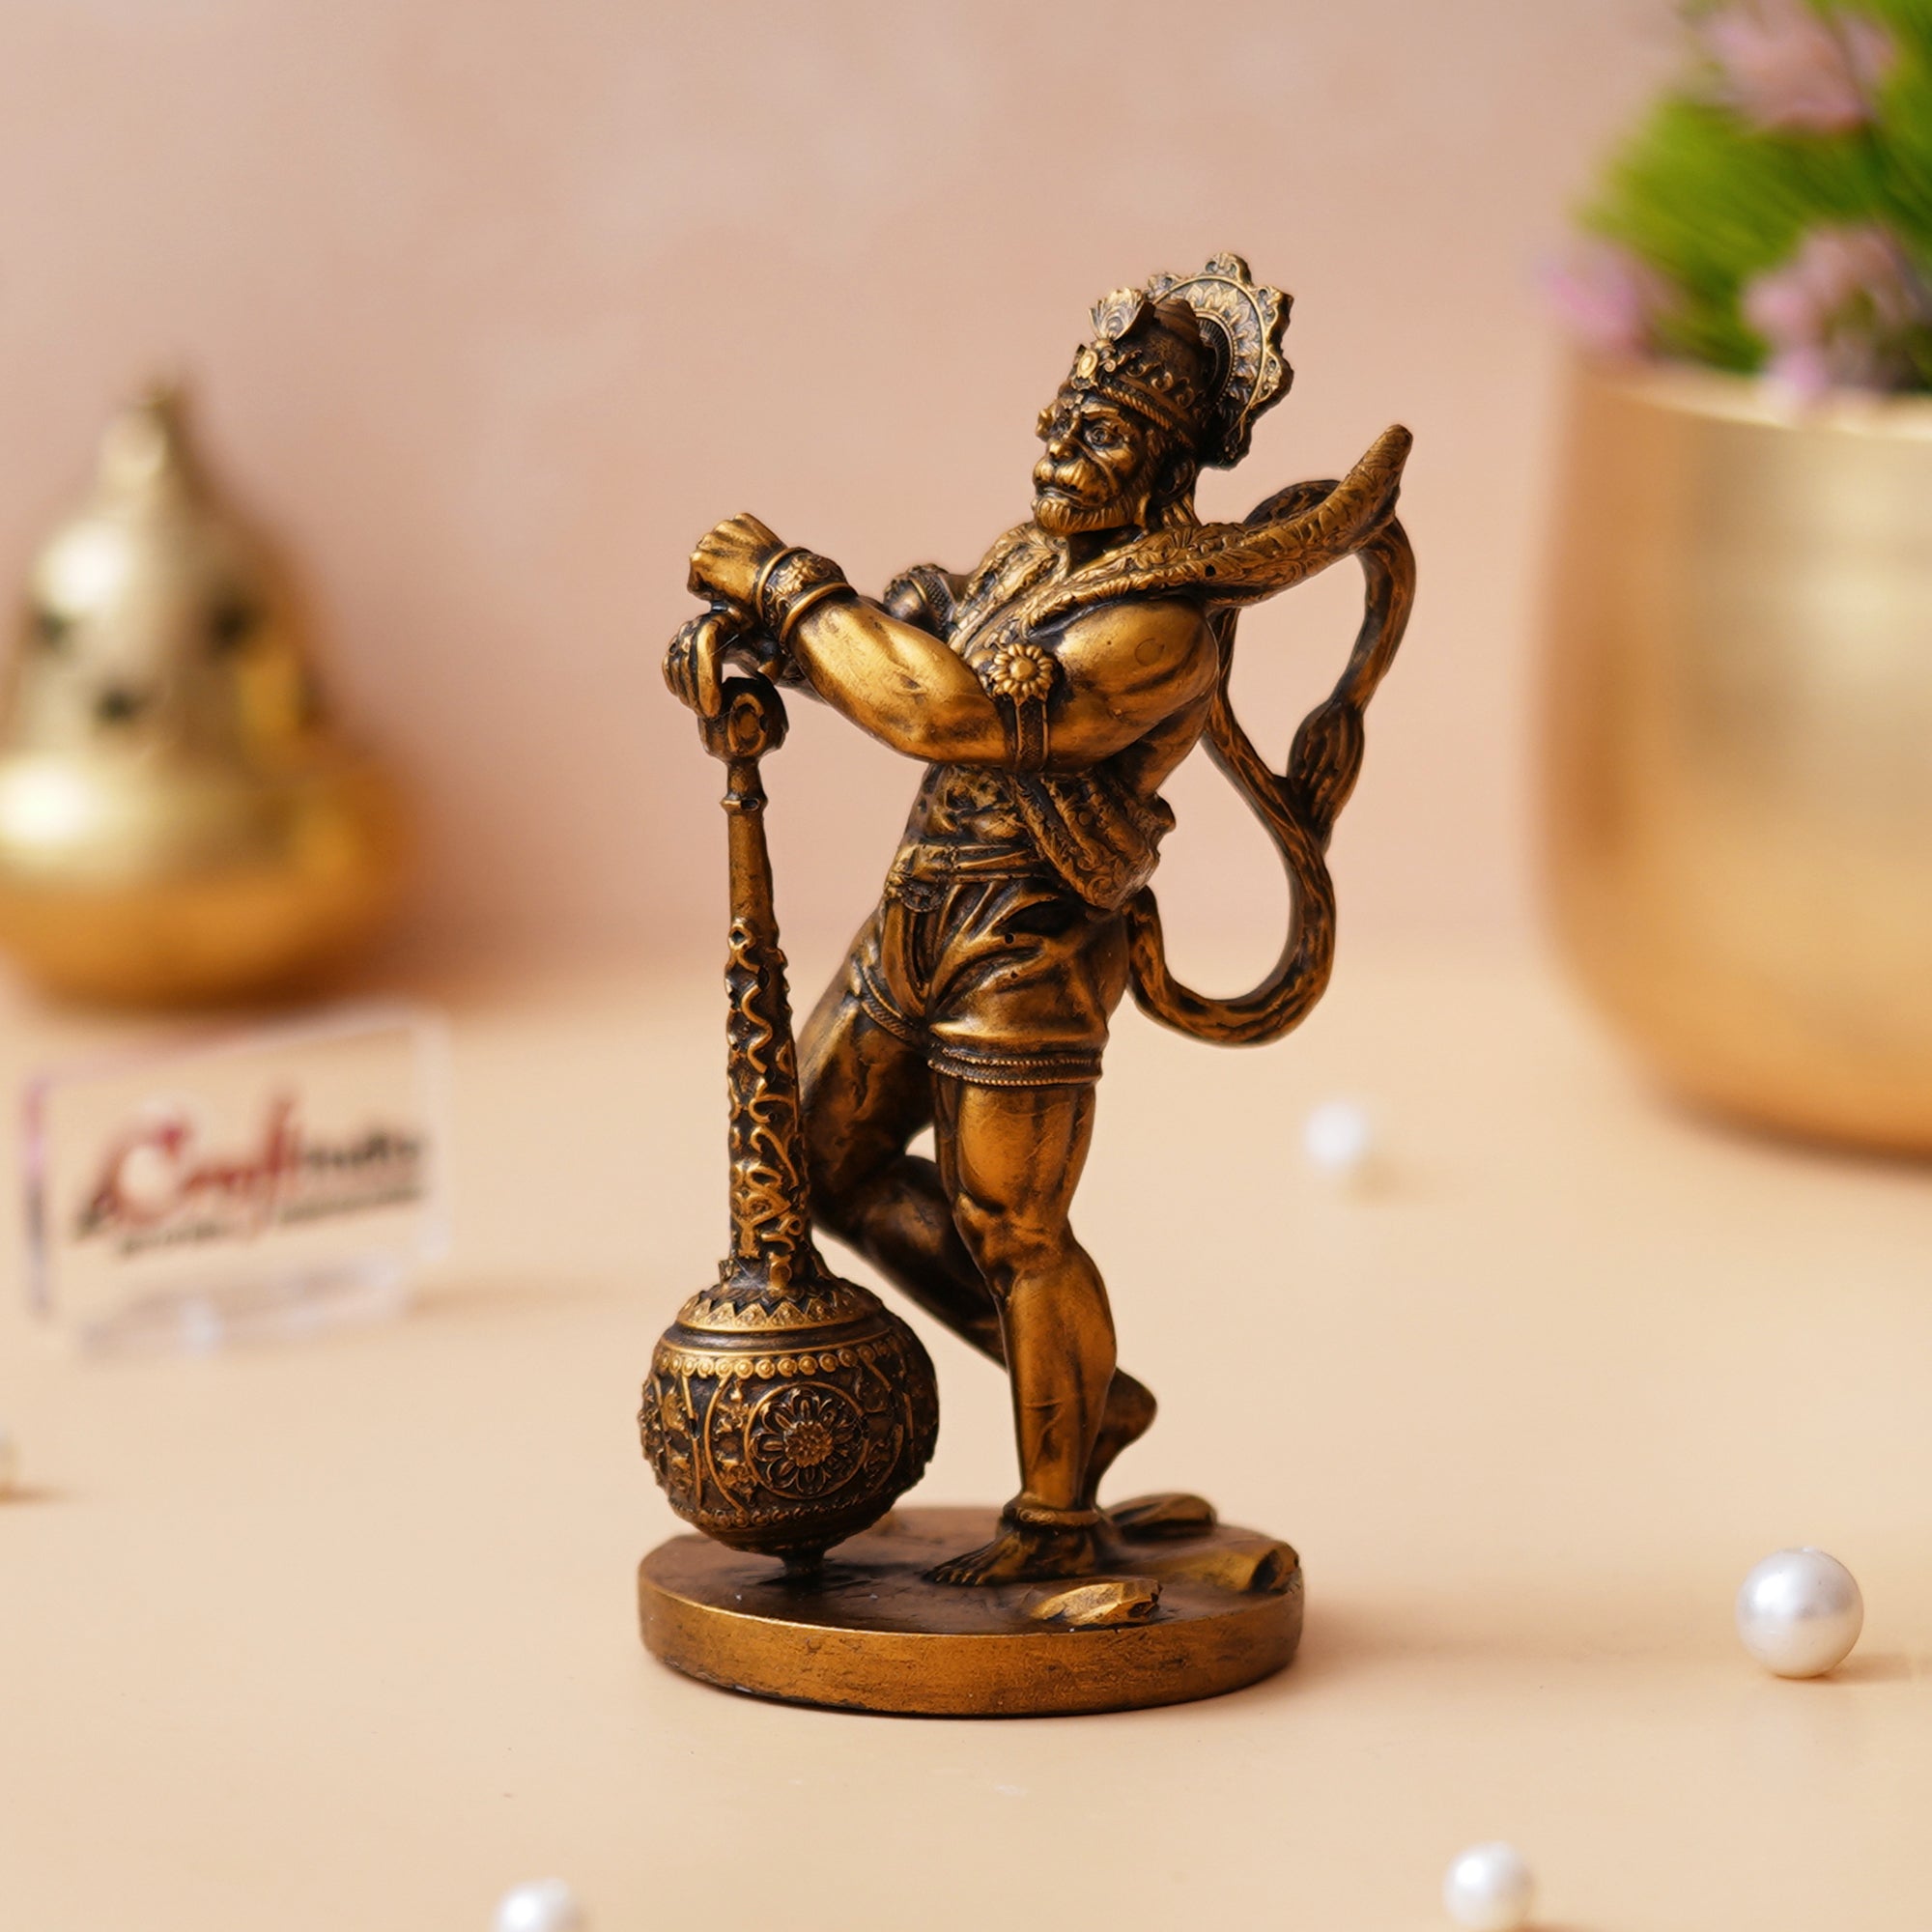 Golden Polyresin Handcrafted Standing Lord Hanuman Idol with Gada/Mace 5